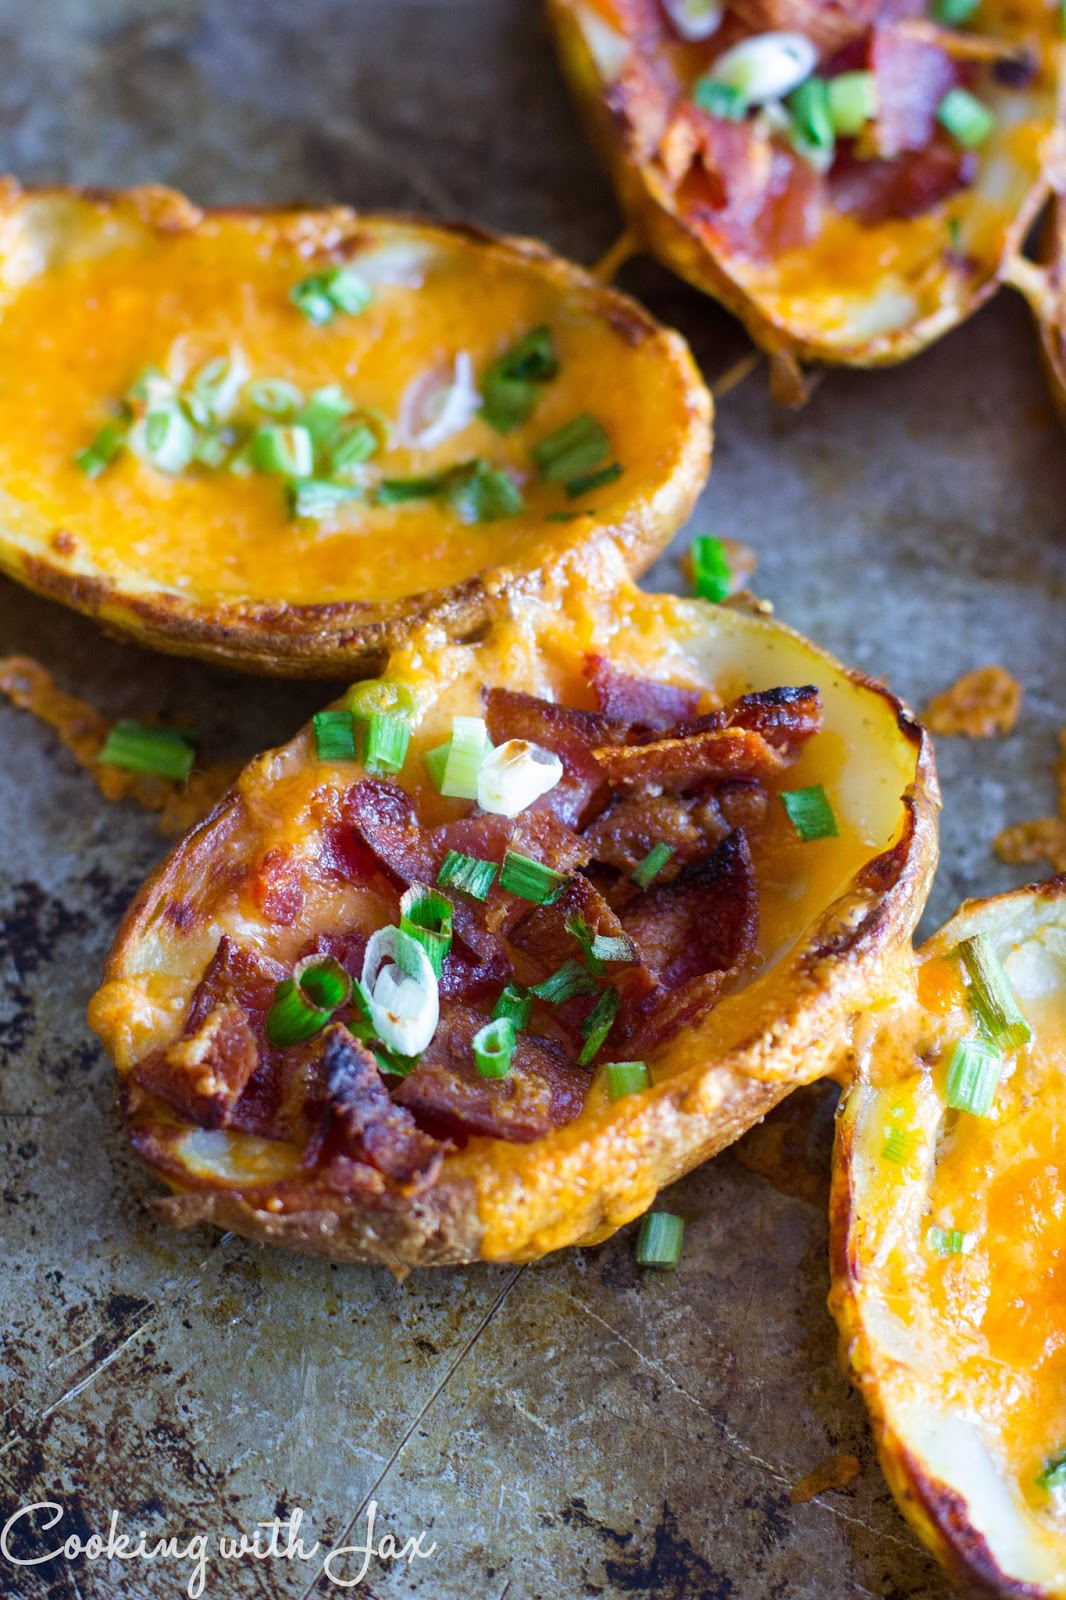 Cooking with Jax: Loaded Potato Skins